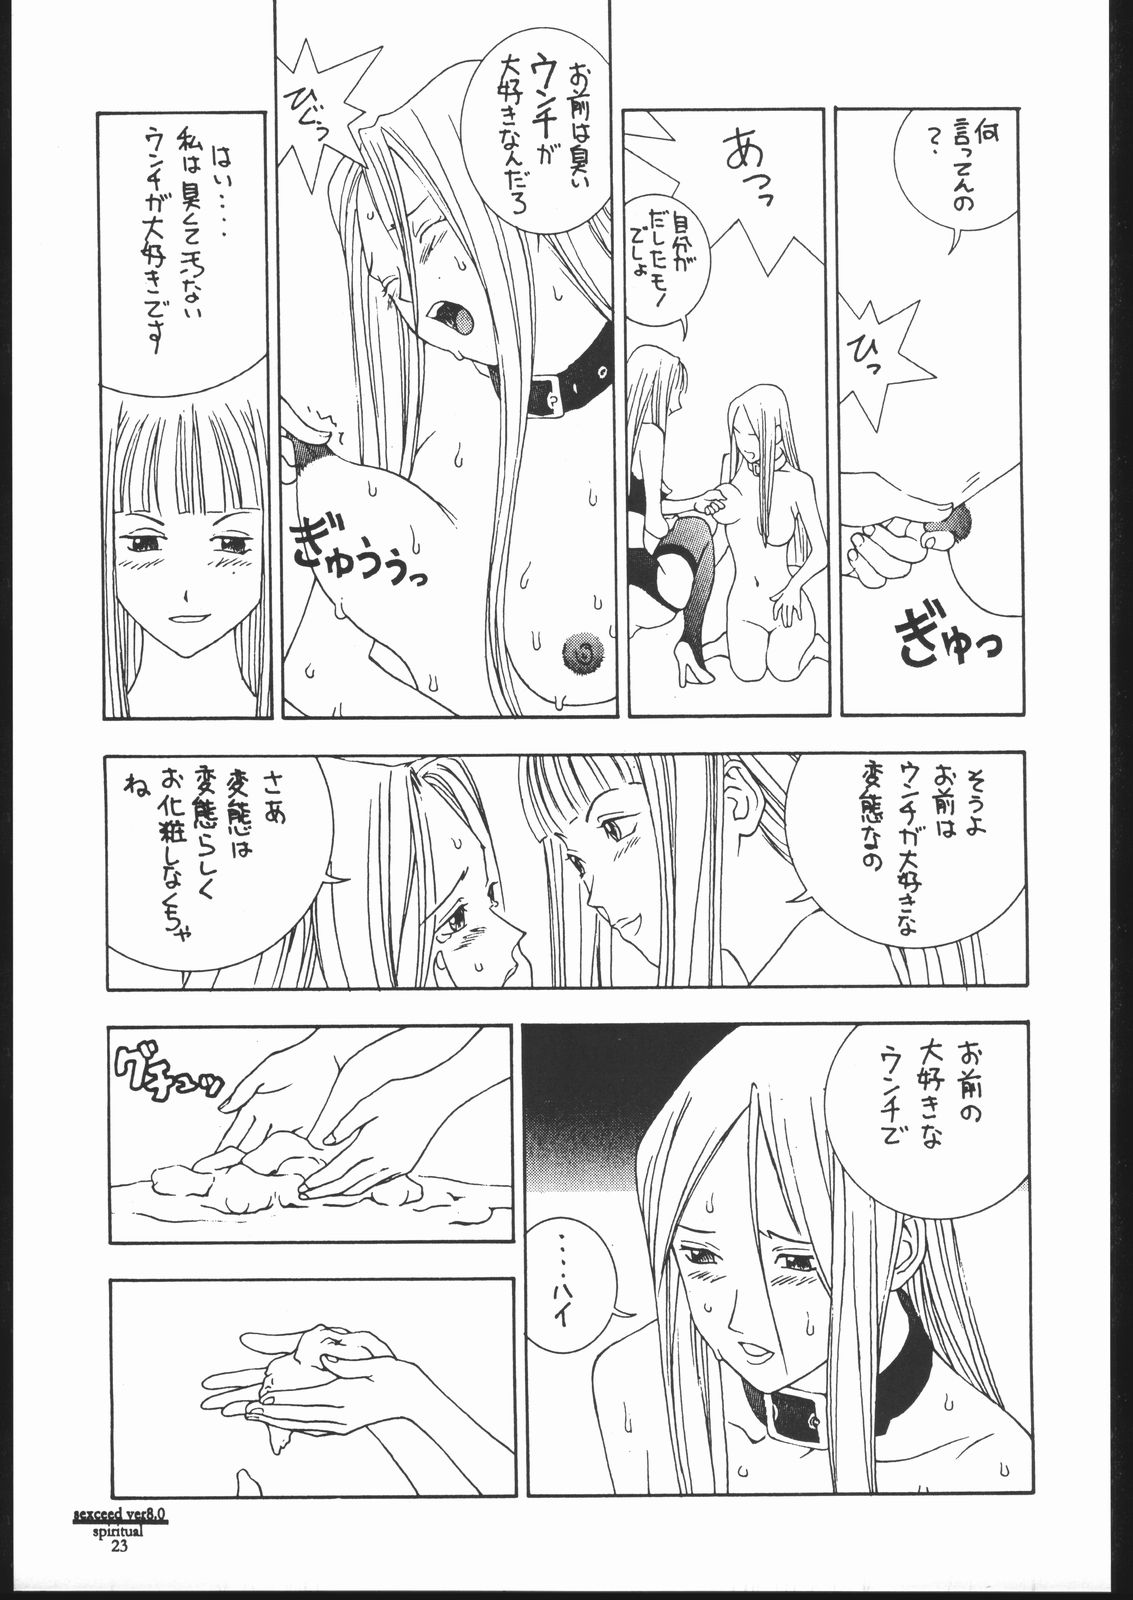 [PINK CAT'S GARDEN] SEXCEED ver.8.0 page 22 full